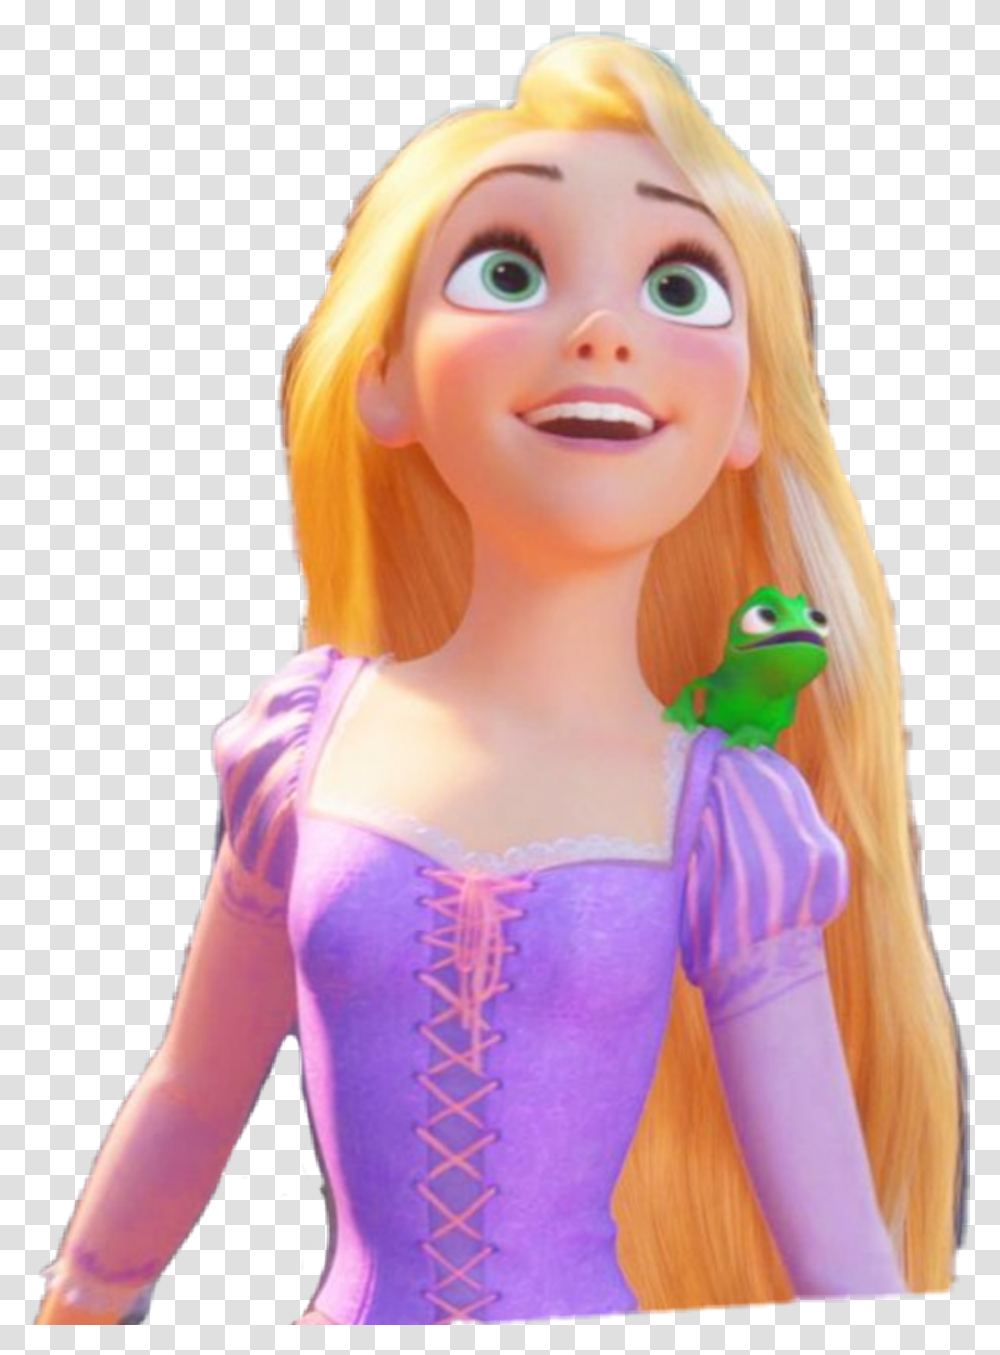 Download Rapunzel Sticker Tangled Image With No, Doll, Toy, Barbie, Figurine Transparent Png